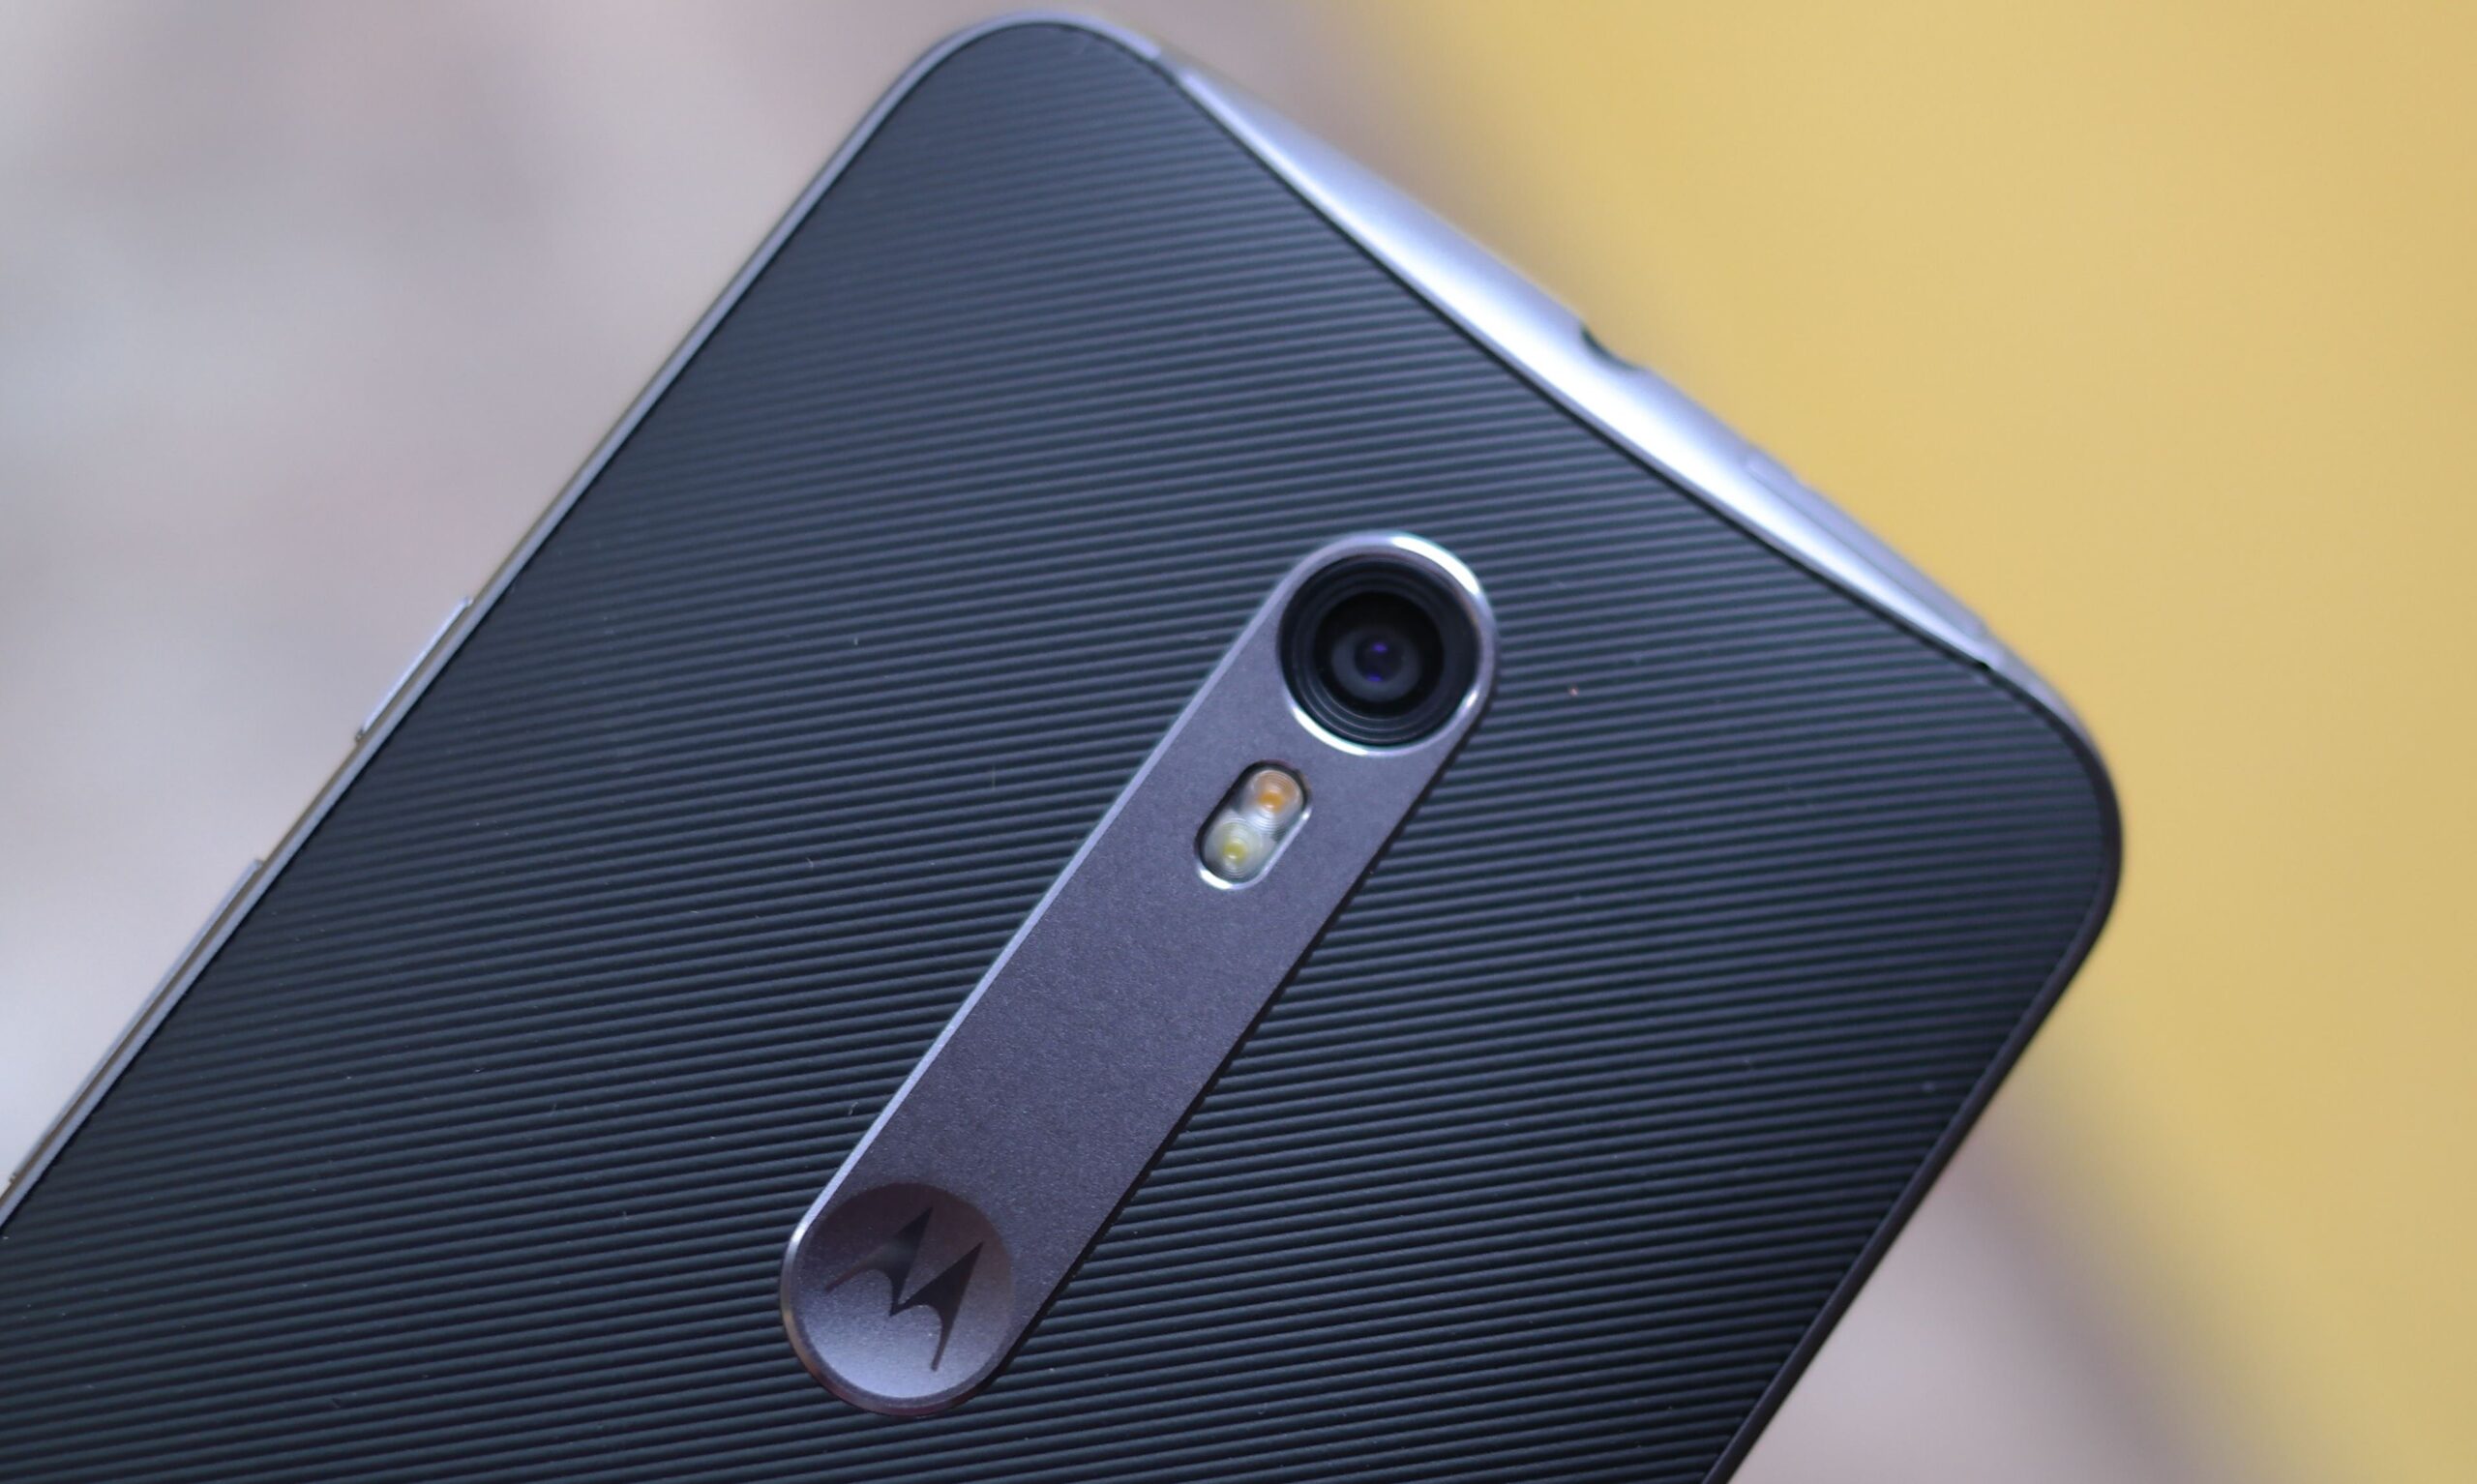 Problems with Moto X Style software are giving users a headache